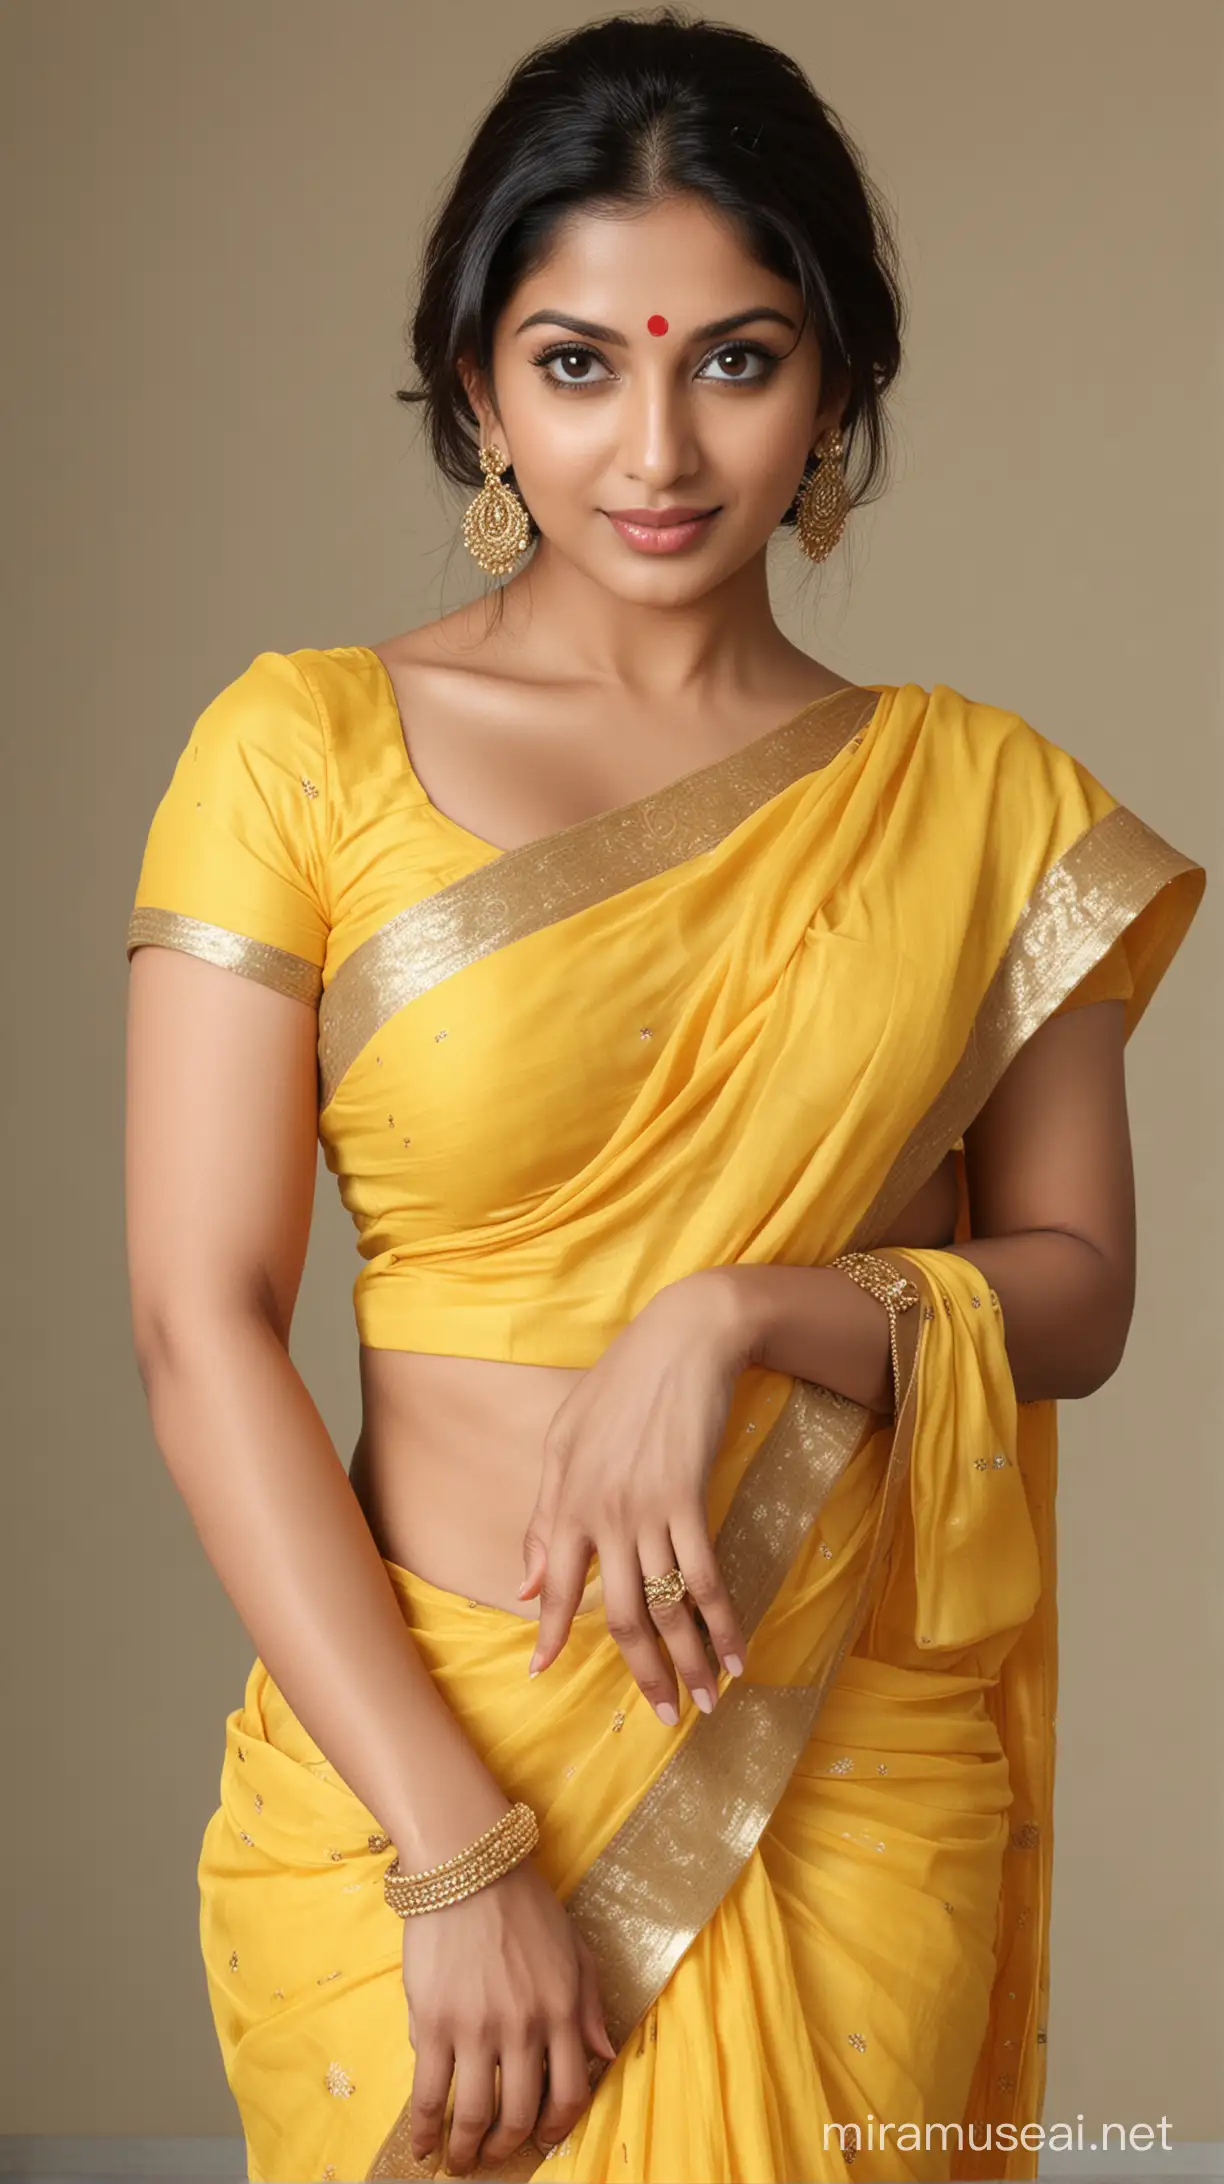 Elegant Indian Woman in Vibrant Yellow Saree and Blouse